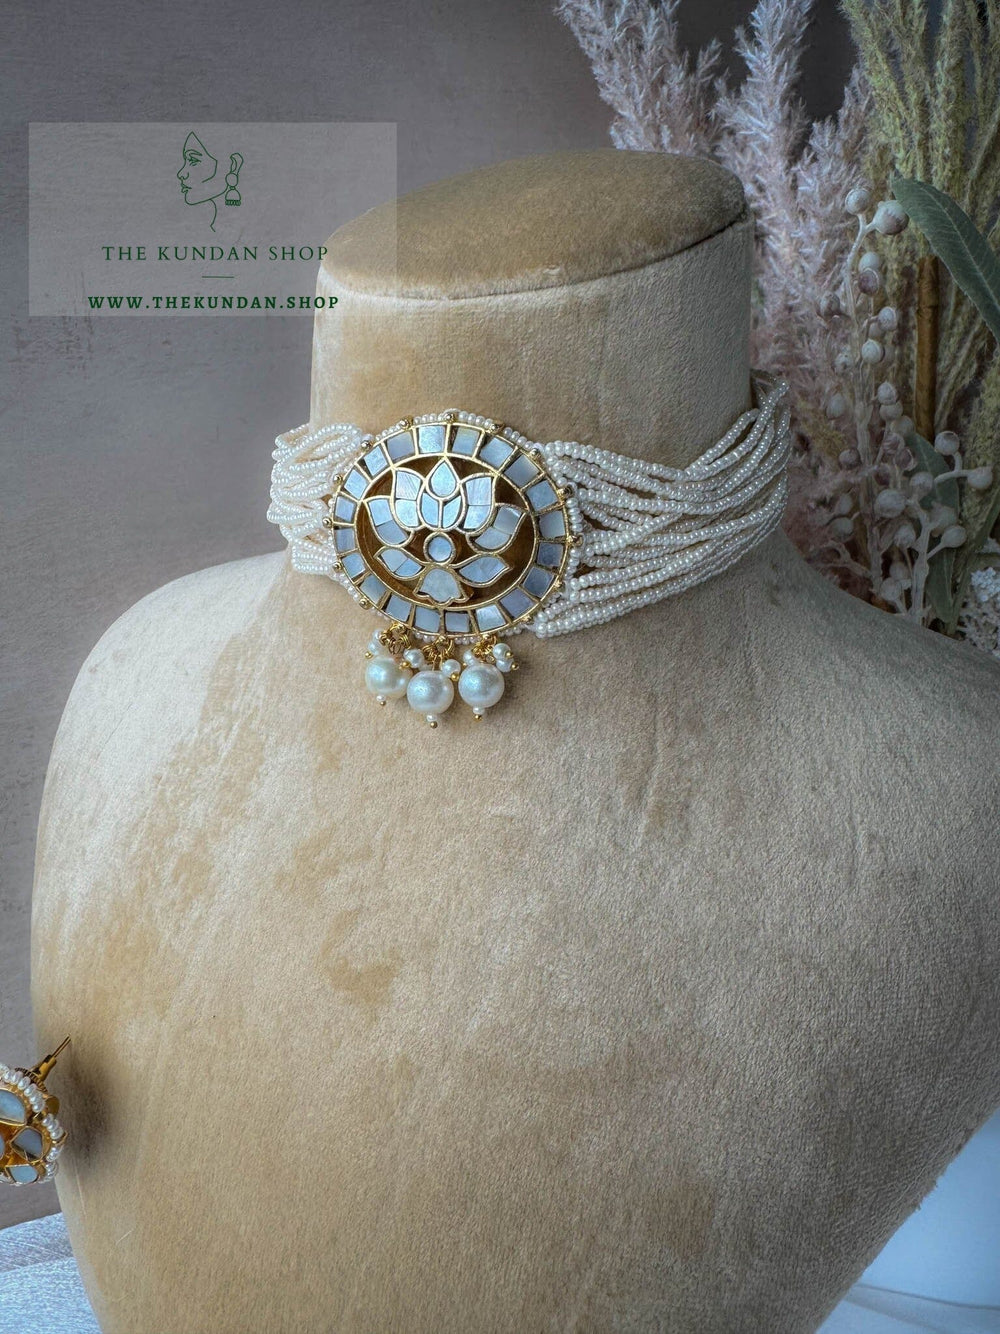 At Ease in Mother of Pearl Necklace Sets THE KUNDAN SHOP 